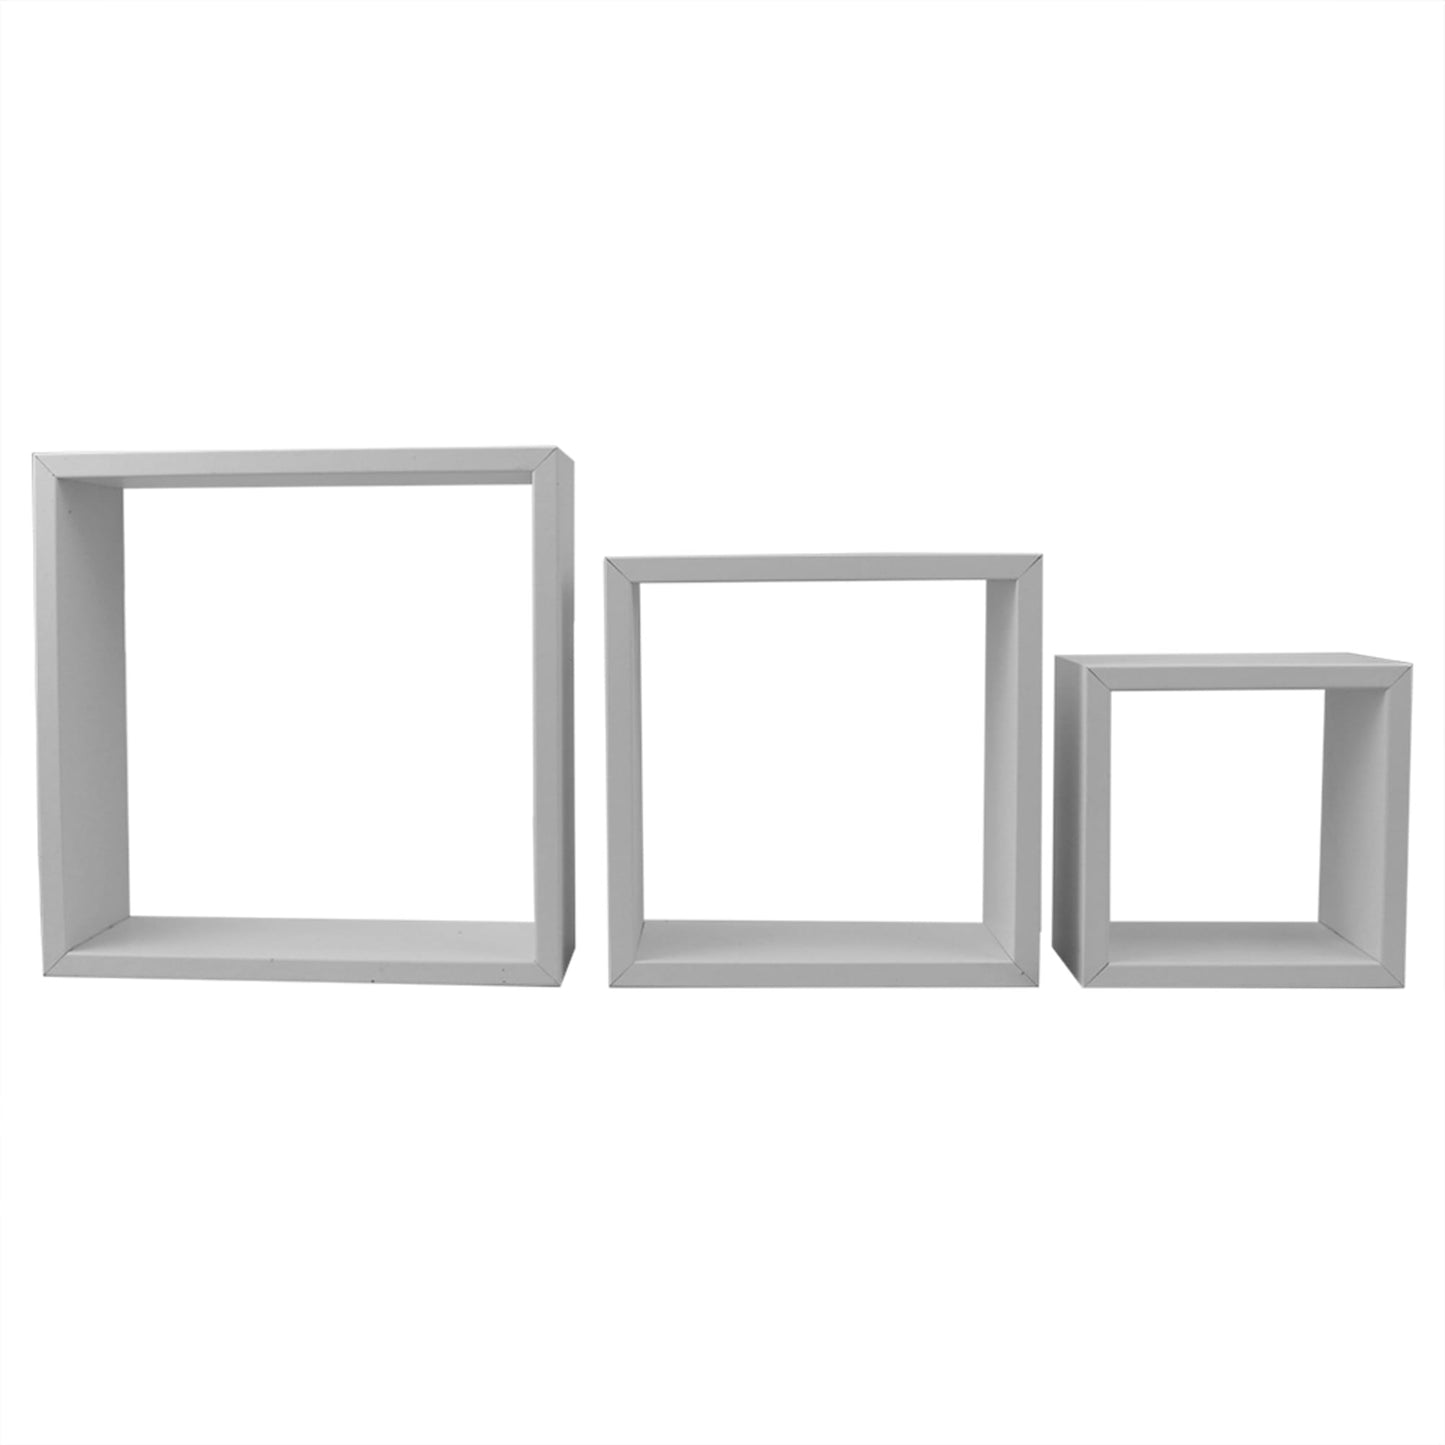 3 Piece MDF Floating Wall Cubes, White